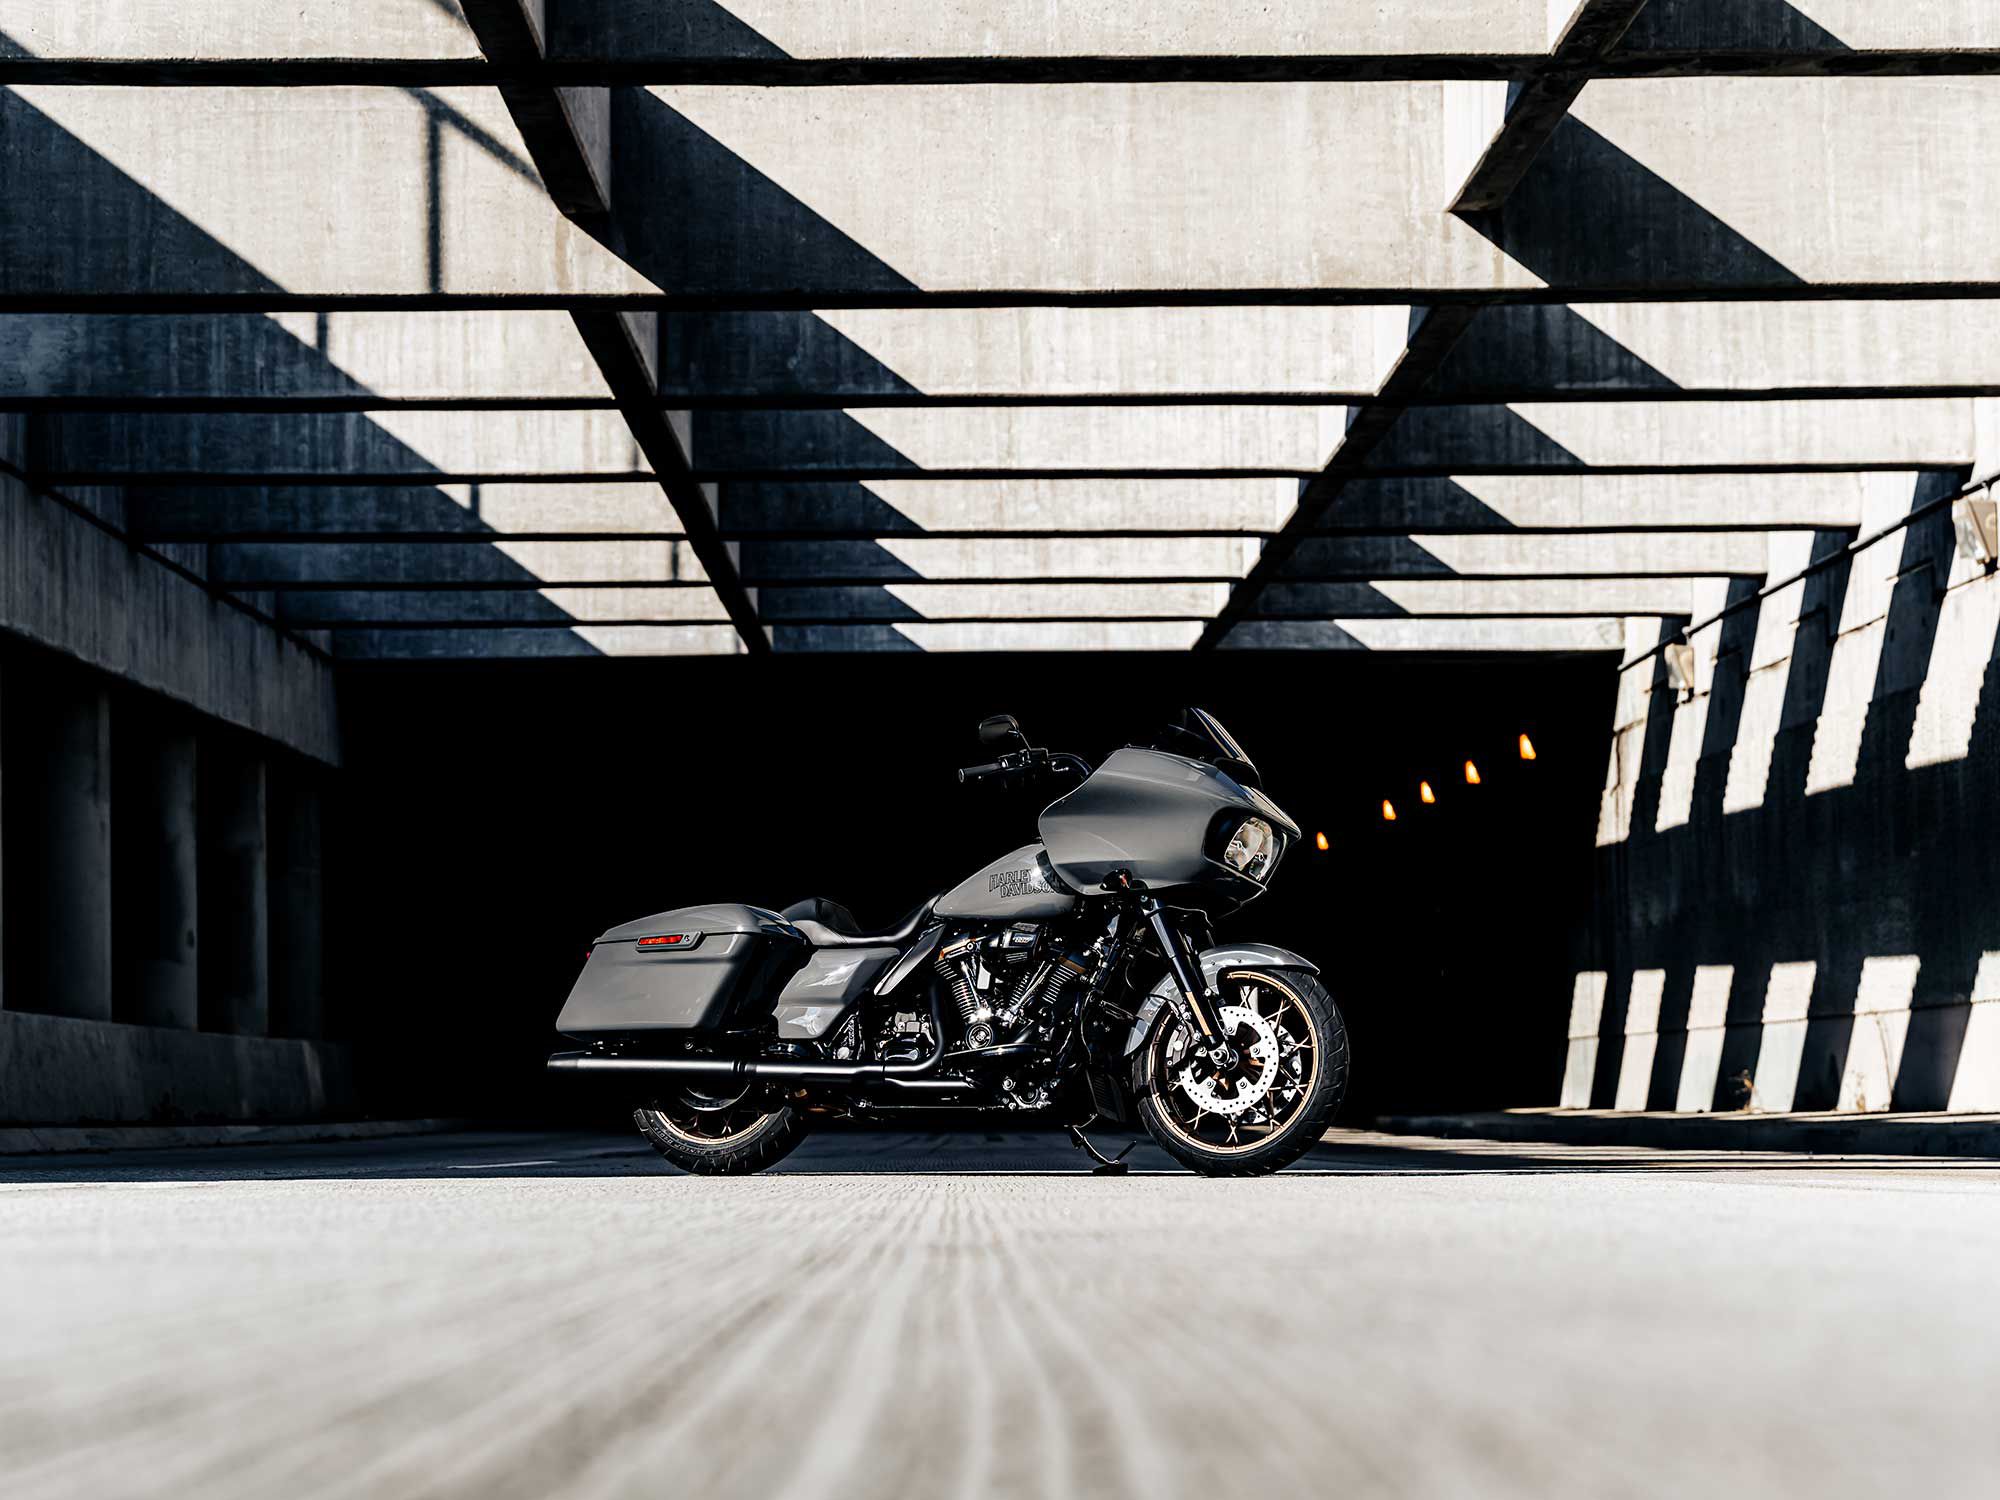 The 2022 Harley-Davidson Road Glide ST in Gunship Gray will be priced at $30,575.